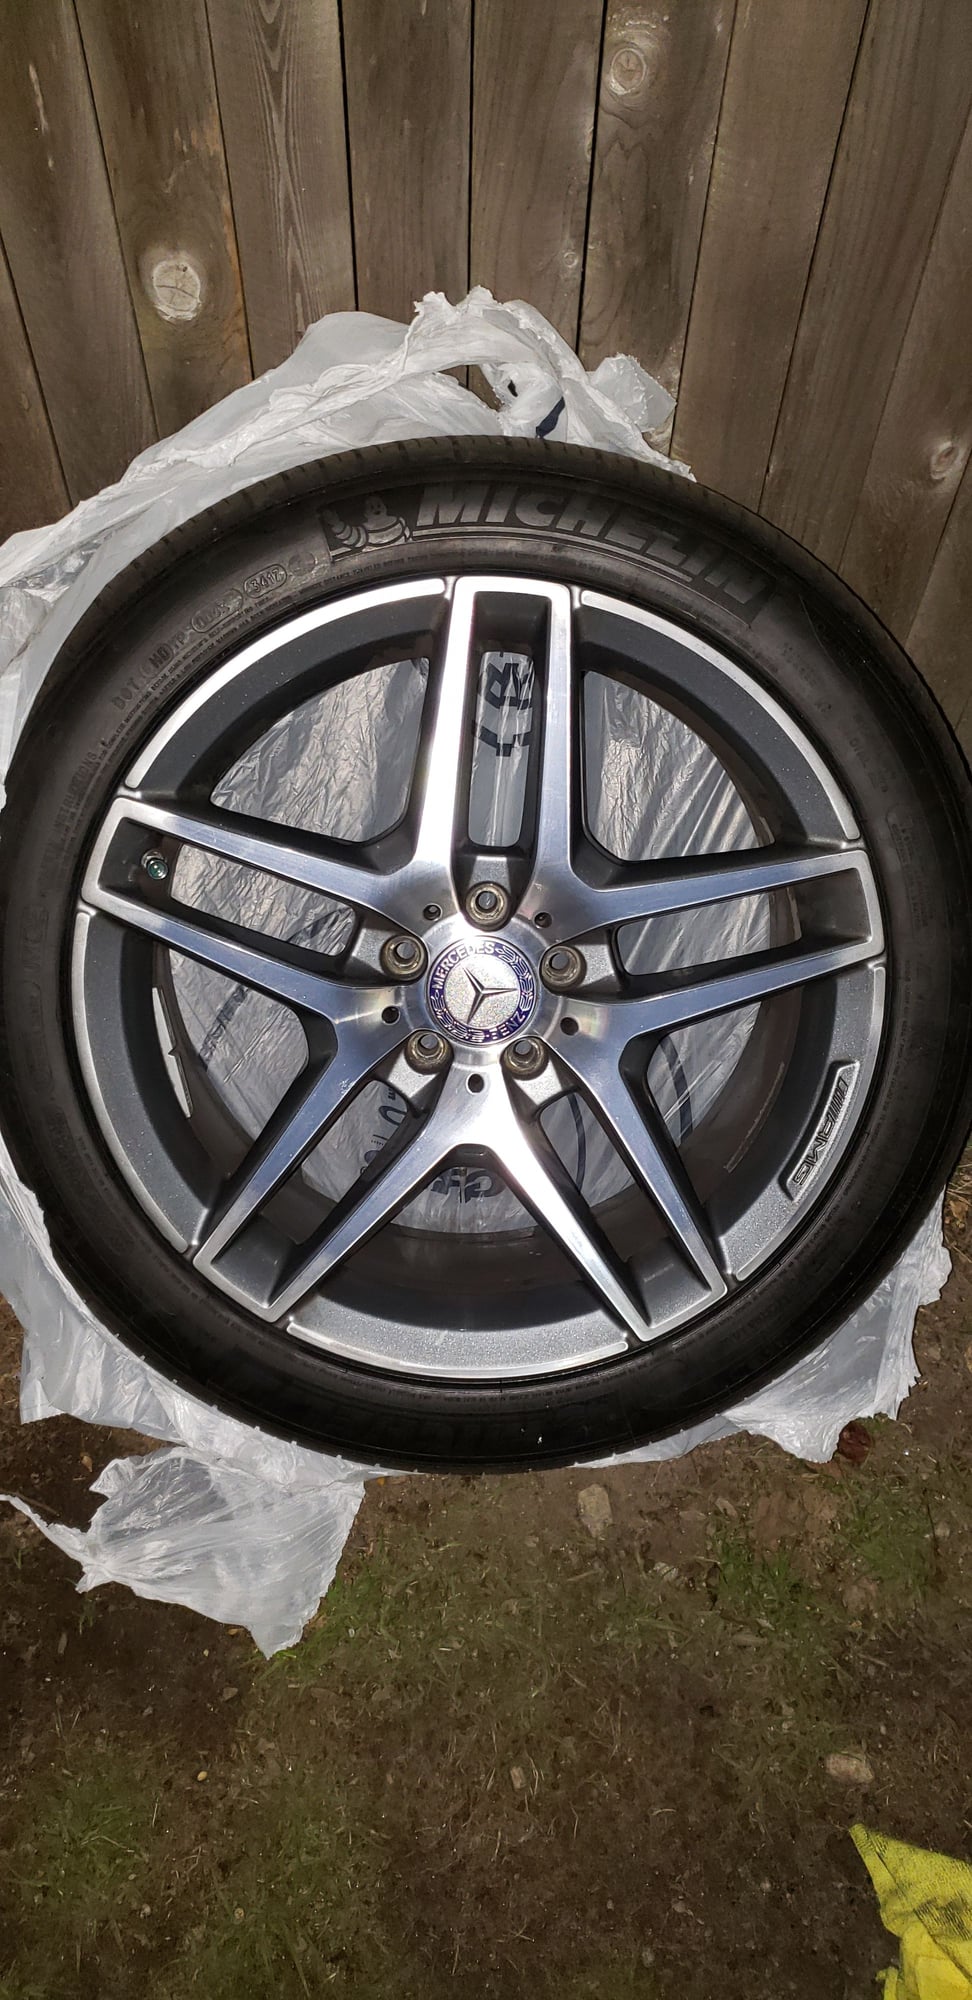 Wheels and Tires/Axles - 2015 S550 CPO Take Off 19" AMG Sport Wheels, Like New! - Used - 2014 to 2019 Mercedes-Benz S550 - West Warwick, RI 02893, United States